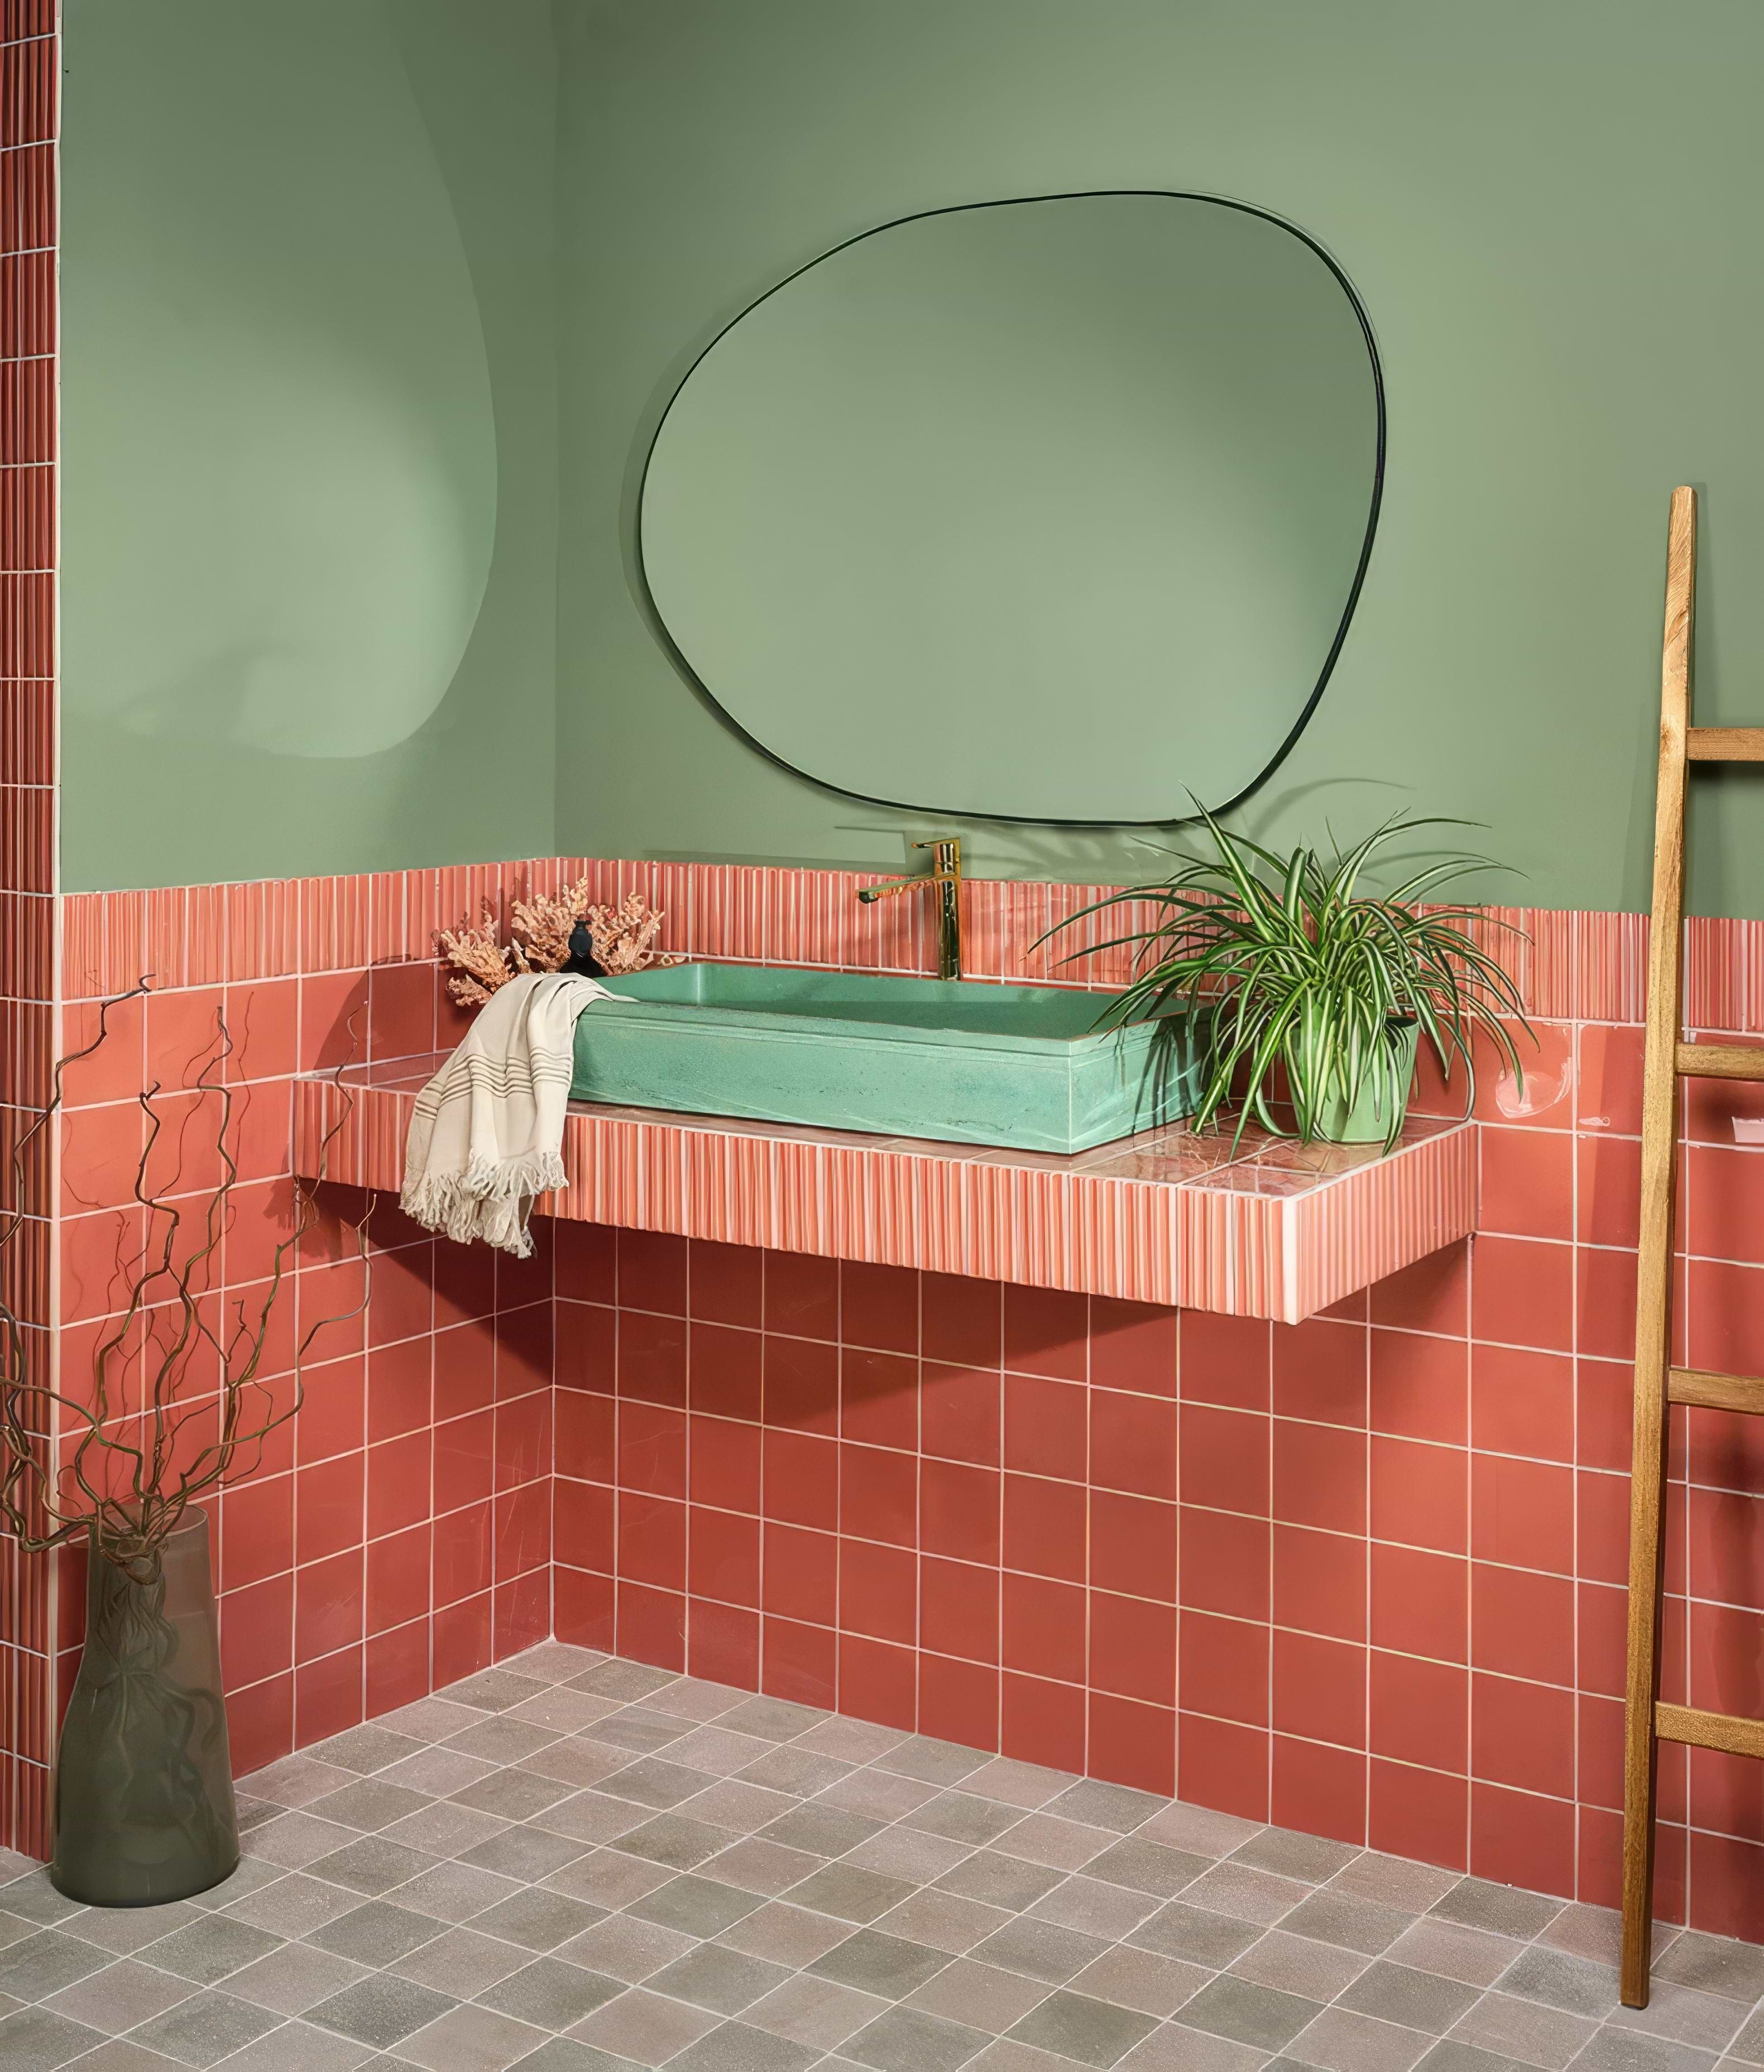 Tunstall Ceramic Fluted Brick Coral - Hyperion Tiles